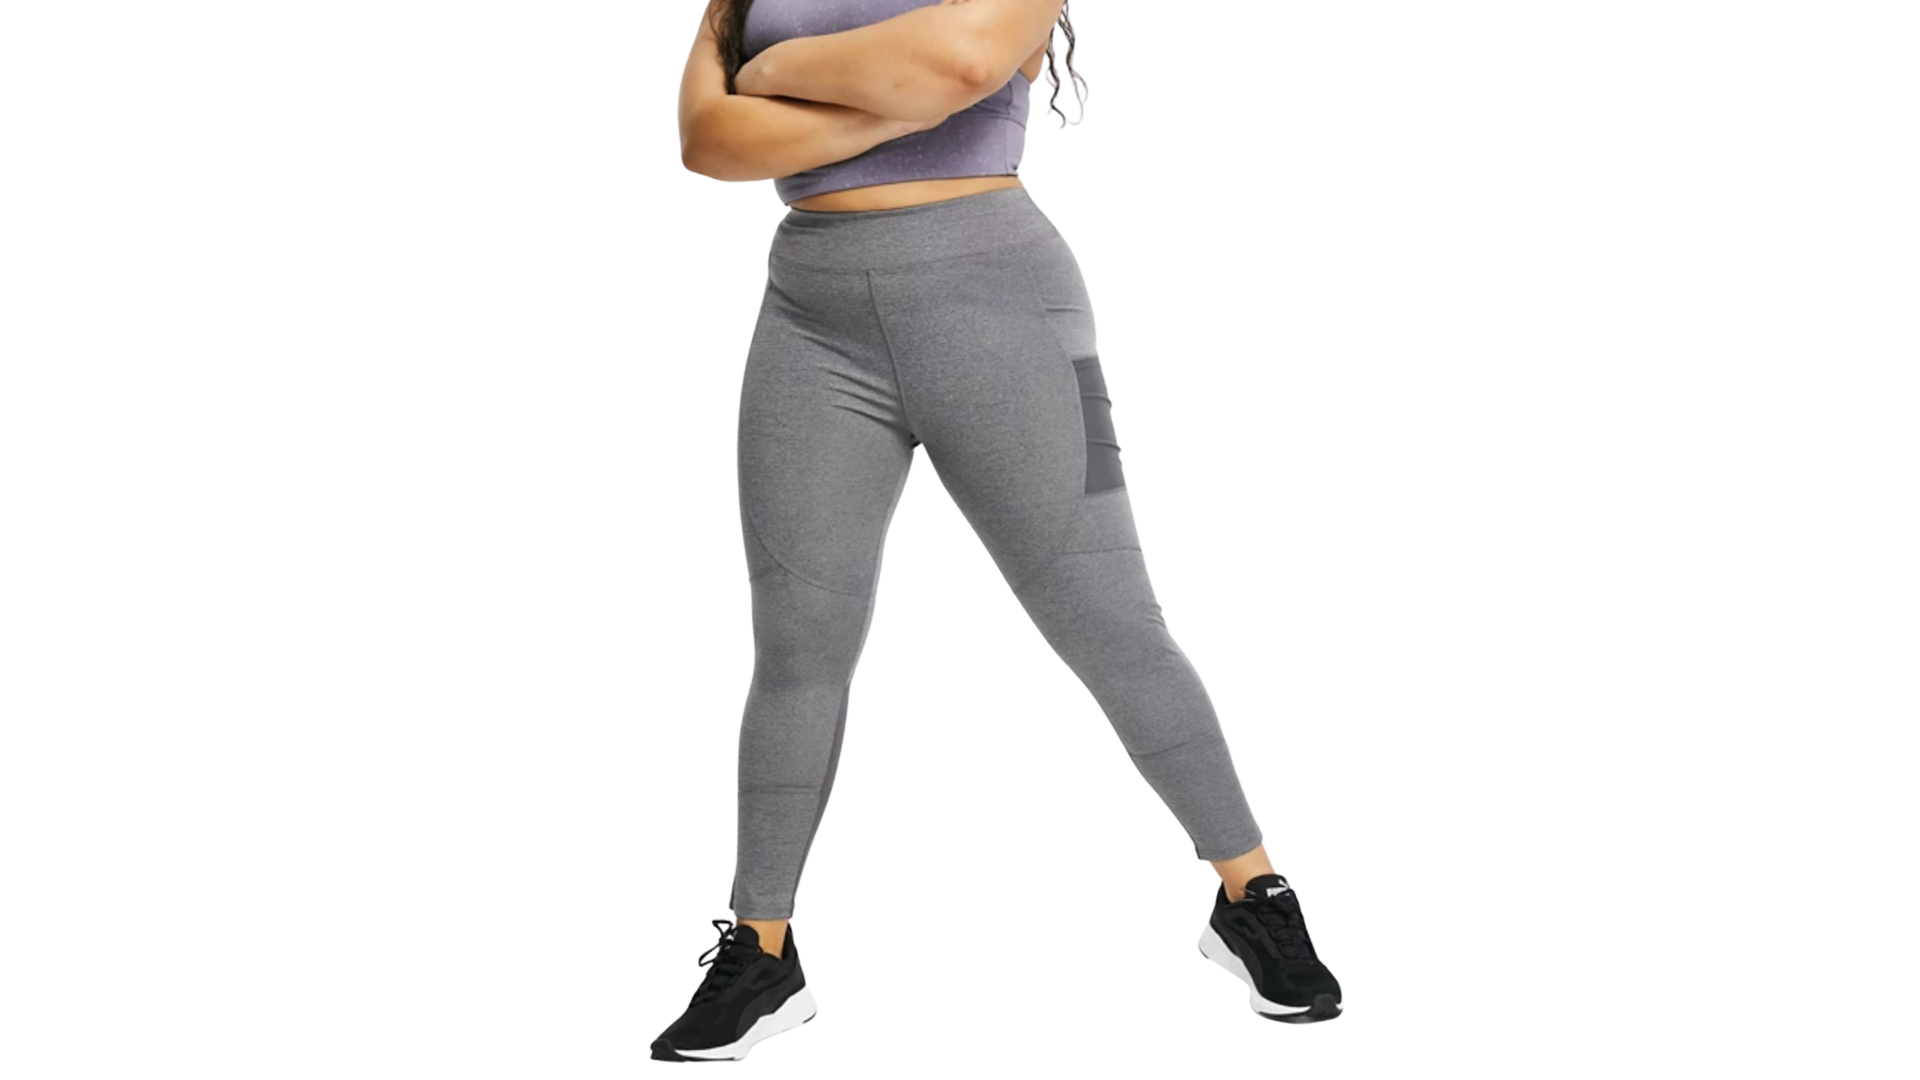 21 Best Plus Size Leggings With Pockets 2021 - Woman's World